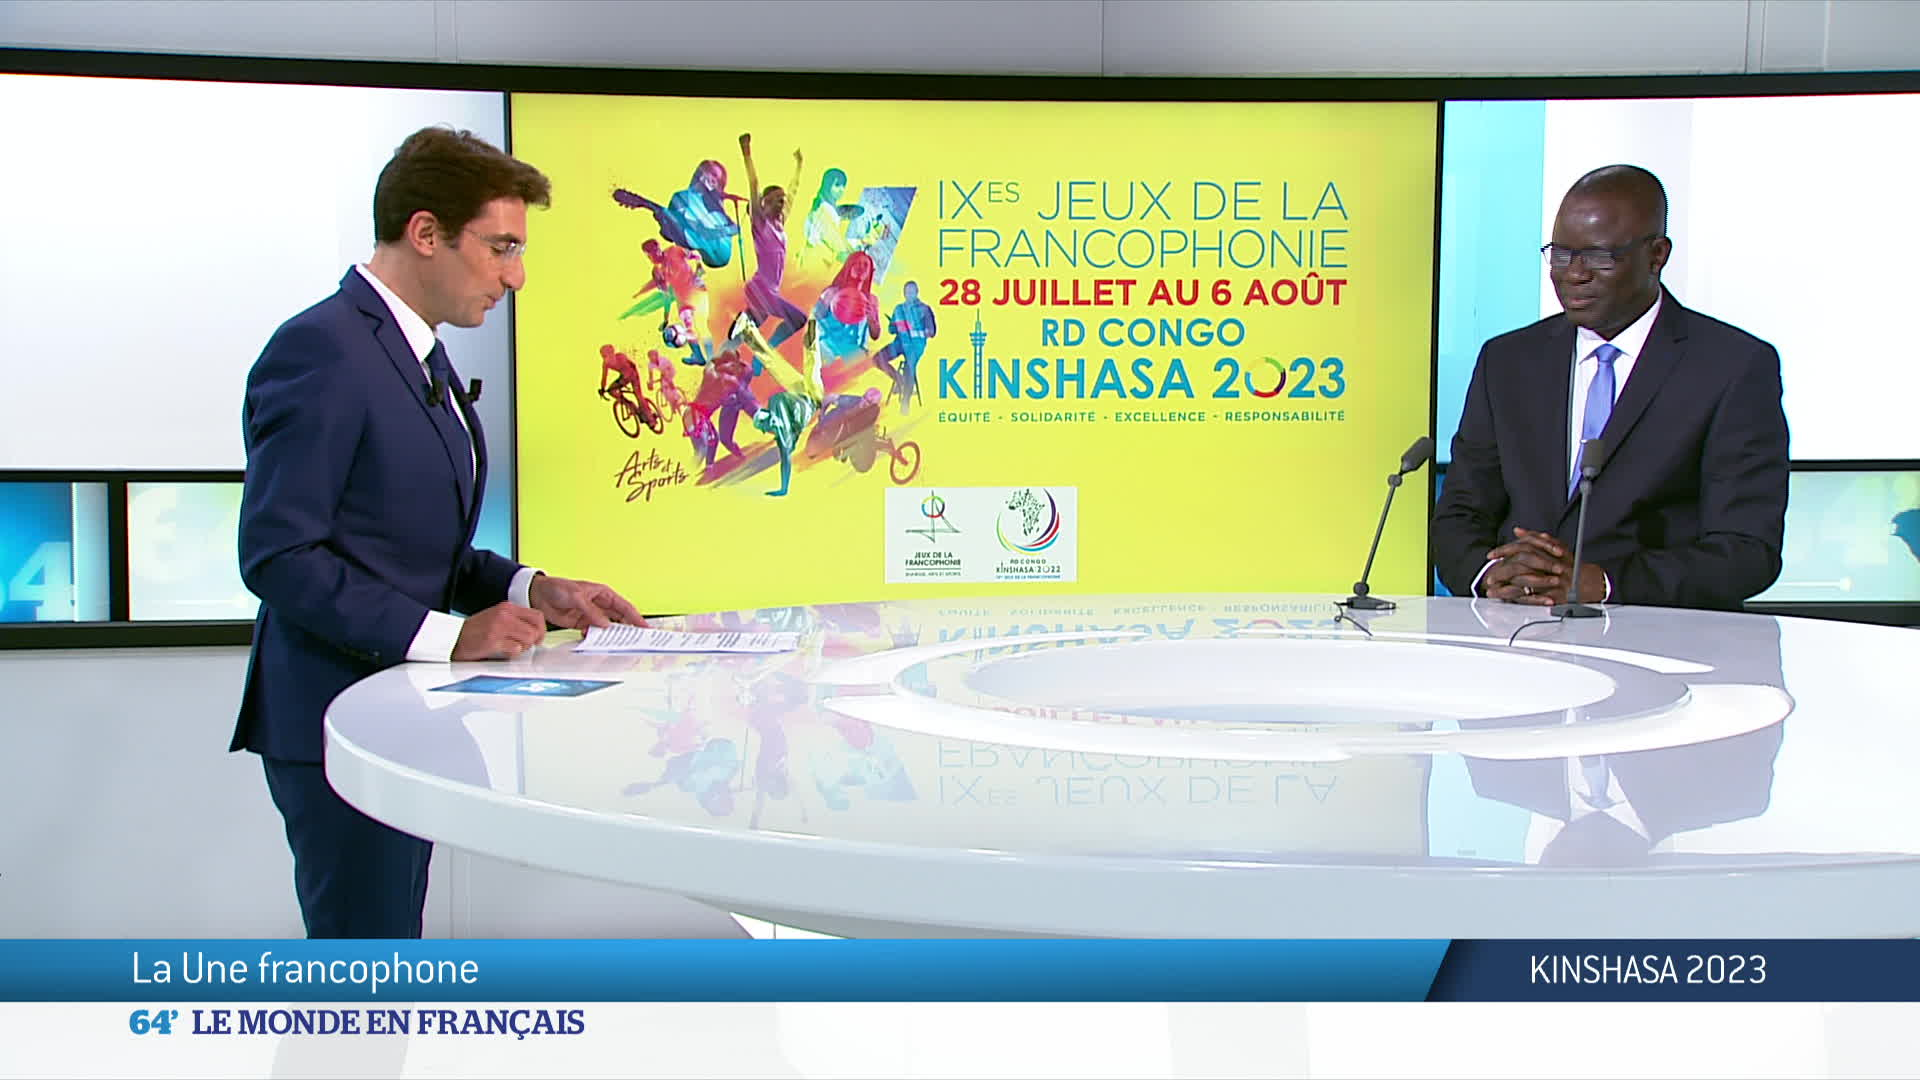 TV5MONDE plans to broadcast 60 hours of coverage from the Francophone Games in Kinshasa ©TV5MONDE